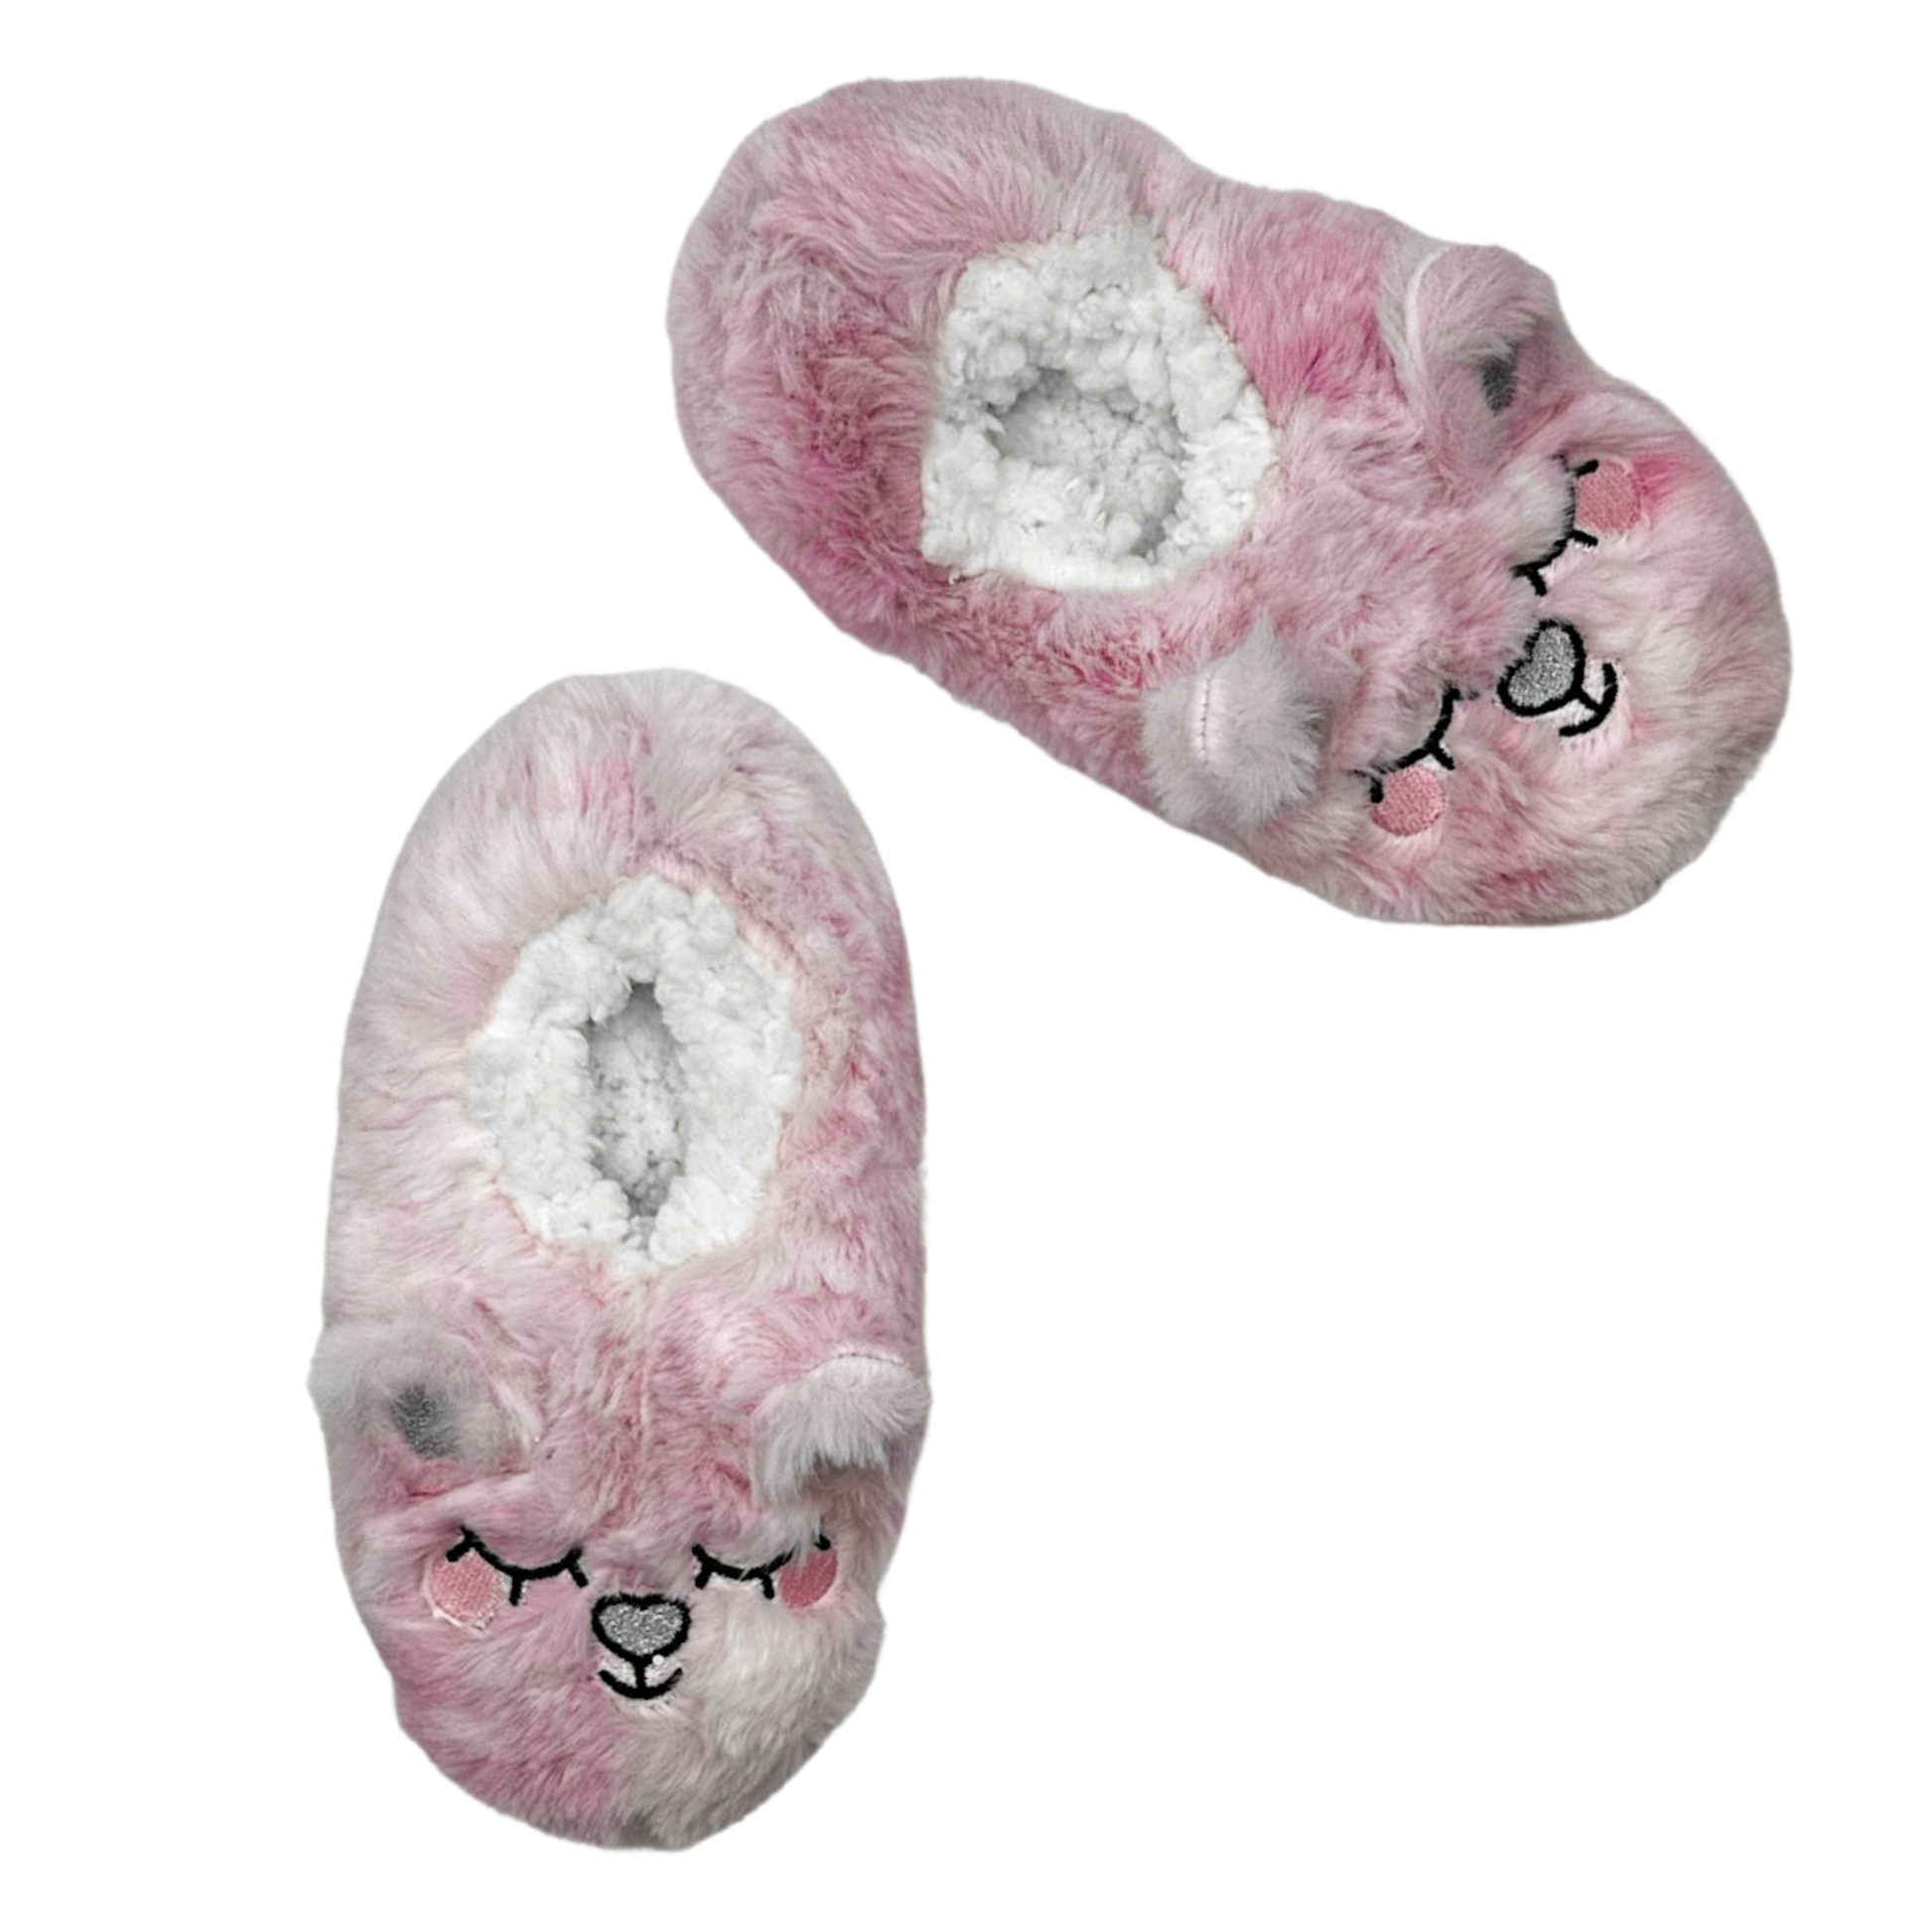 A pair of pink slippers with a smiling animal face on them and 3D sparkly ears